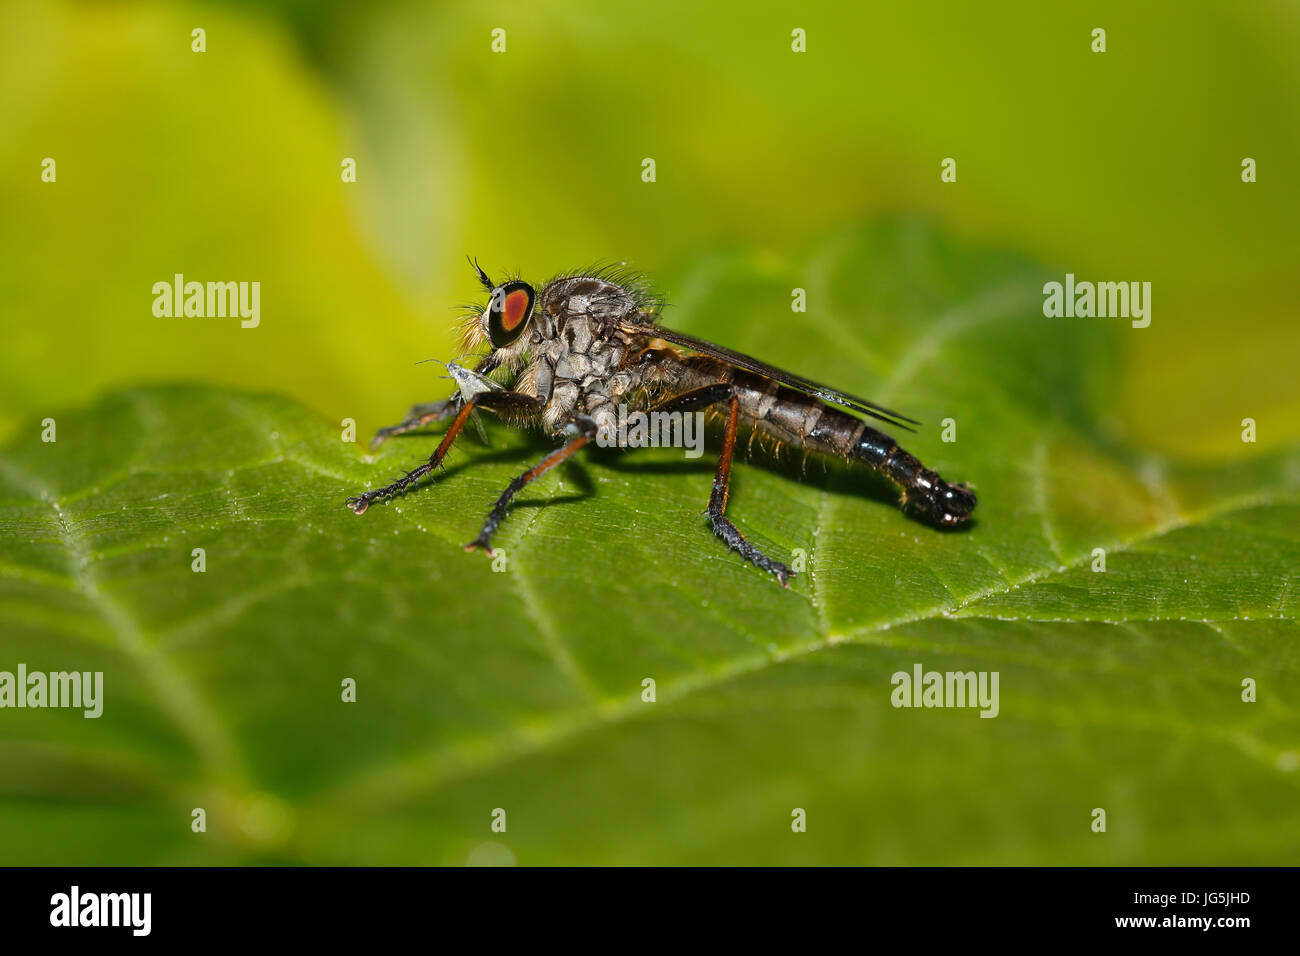 Robber fly (Asilidae) feeding from an aphid (Aphidoidea), Schleswig-Holstein, Germany Stock Photo